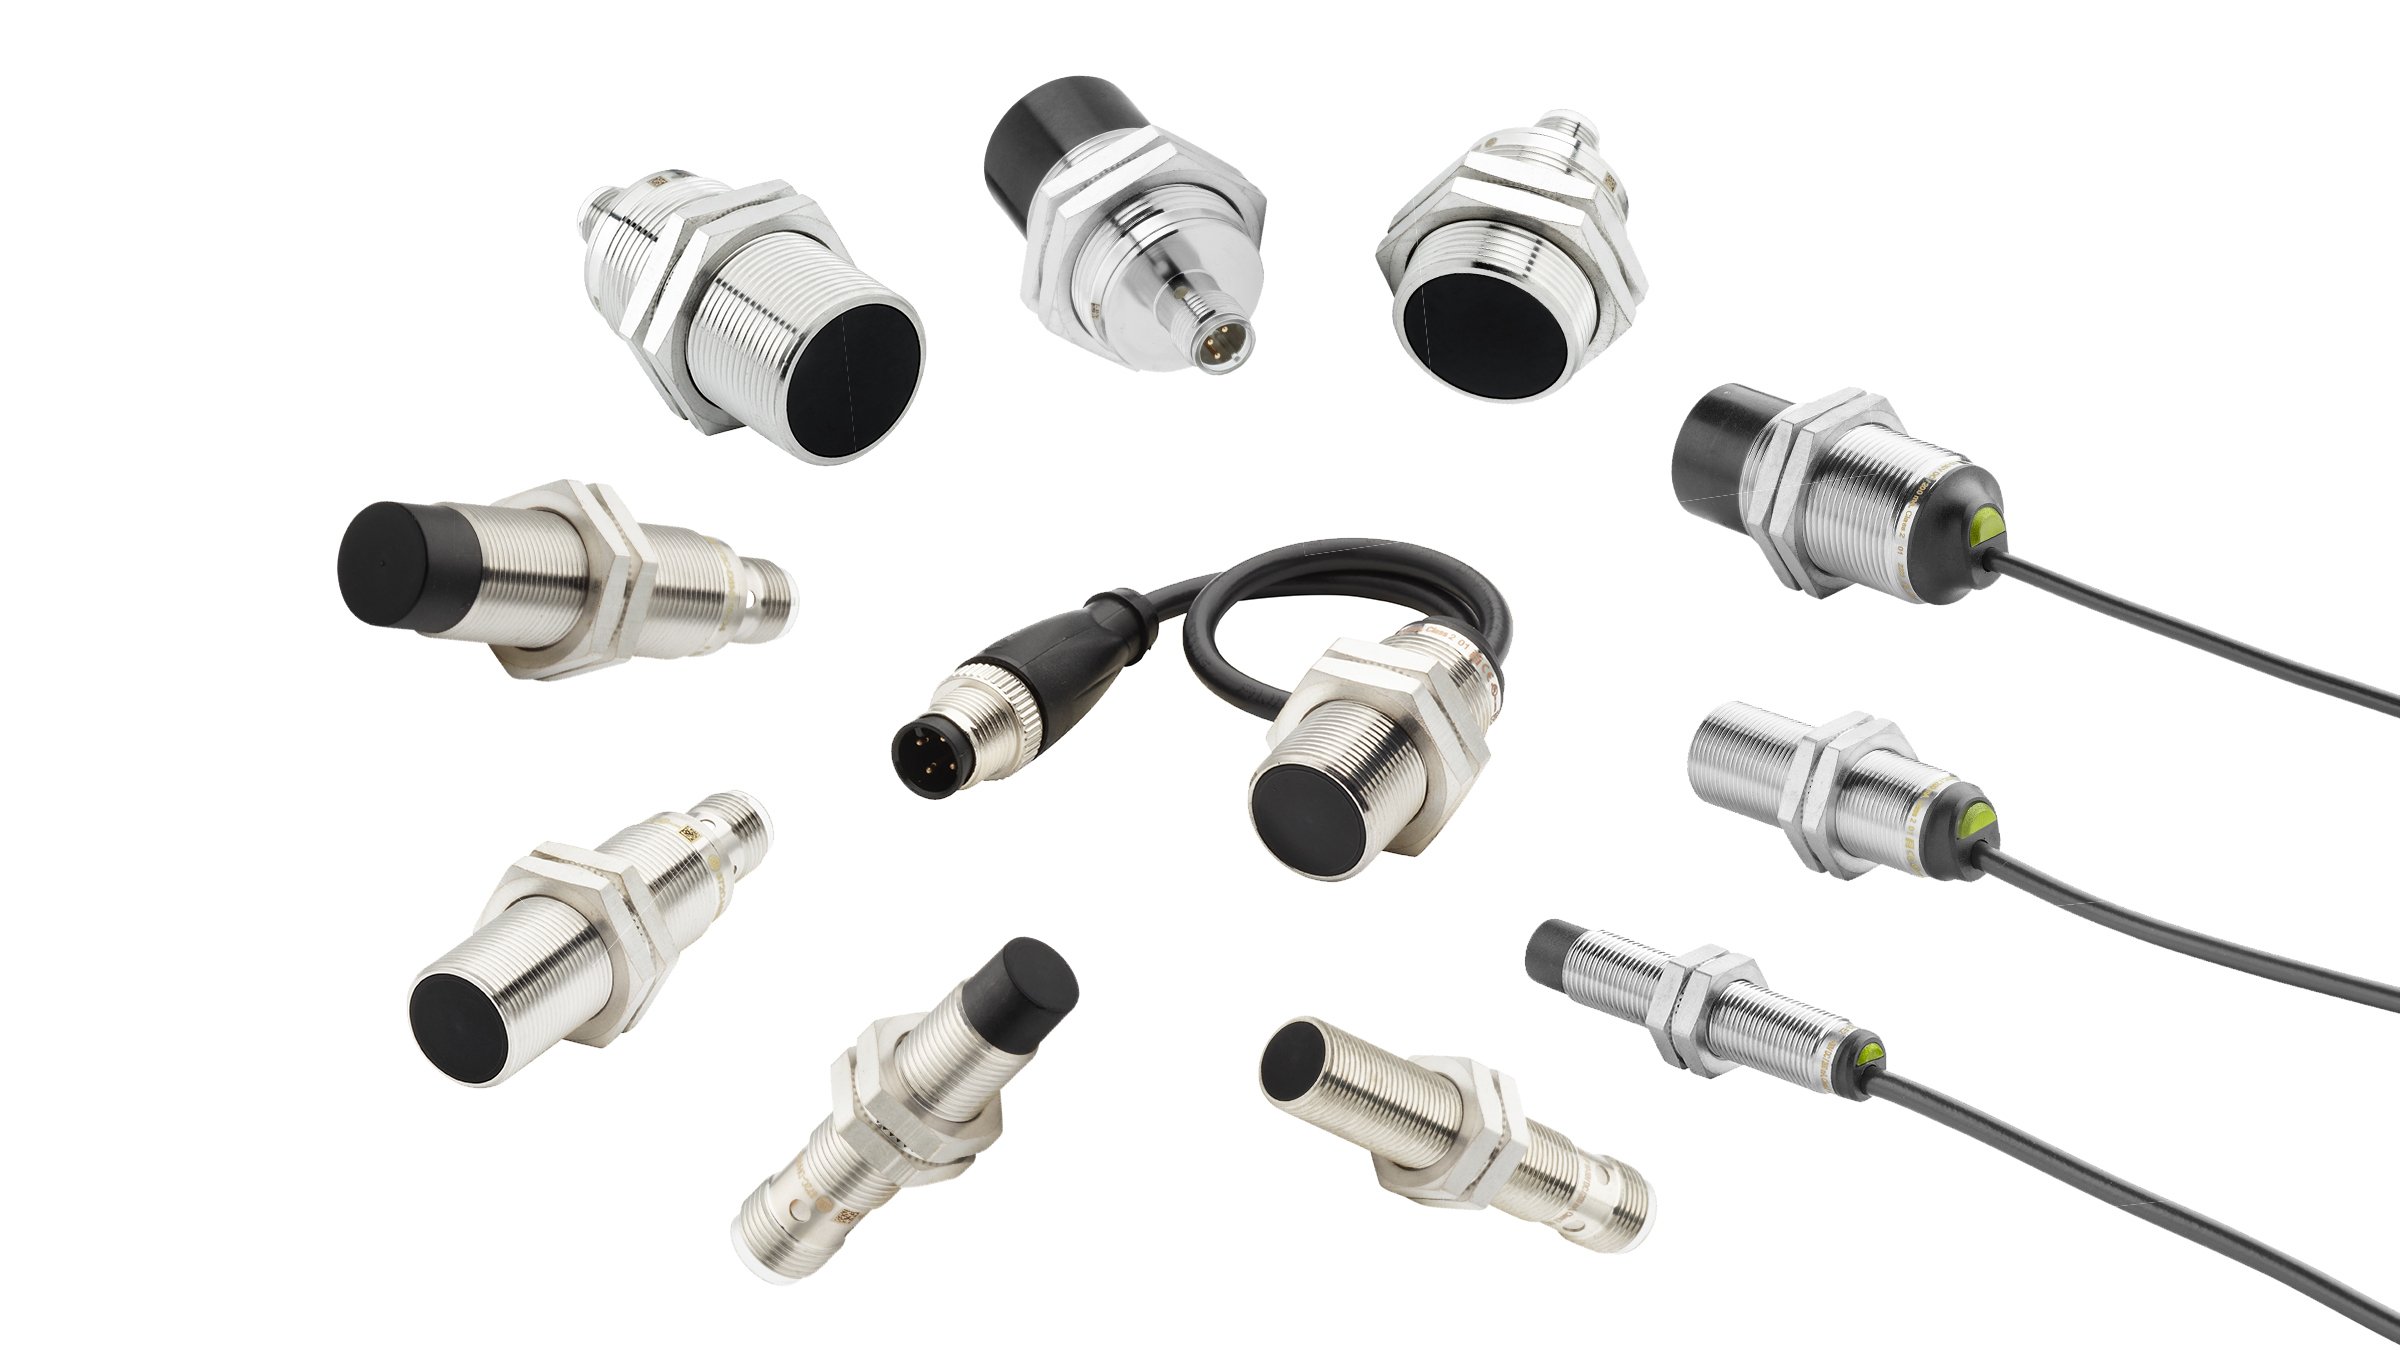 Family shot of 11 tubular inductive proximity sensors with threaded, nickel-plated brass barrels. Arranged in various angles showing either the black sensing face or the connection ends.